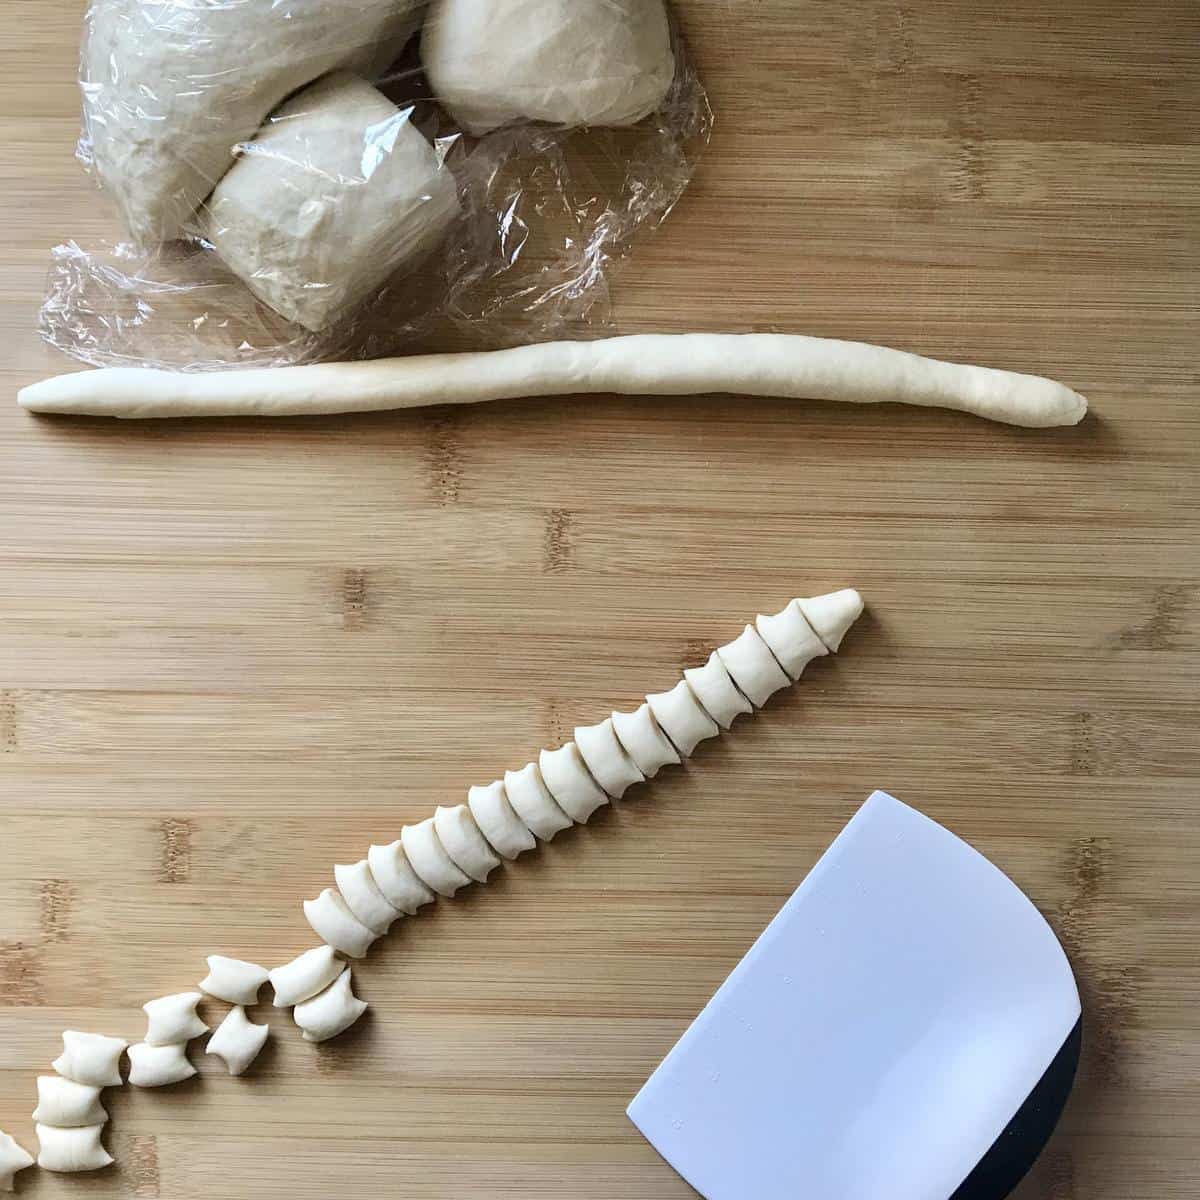 Ropes of cavatelli dough cut into small pieces.